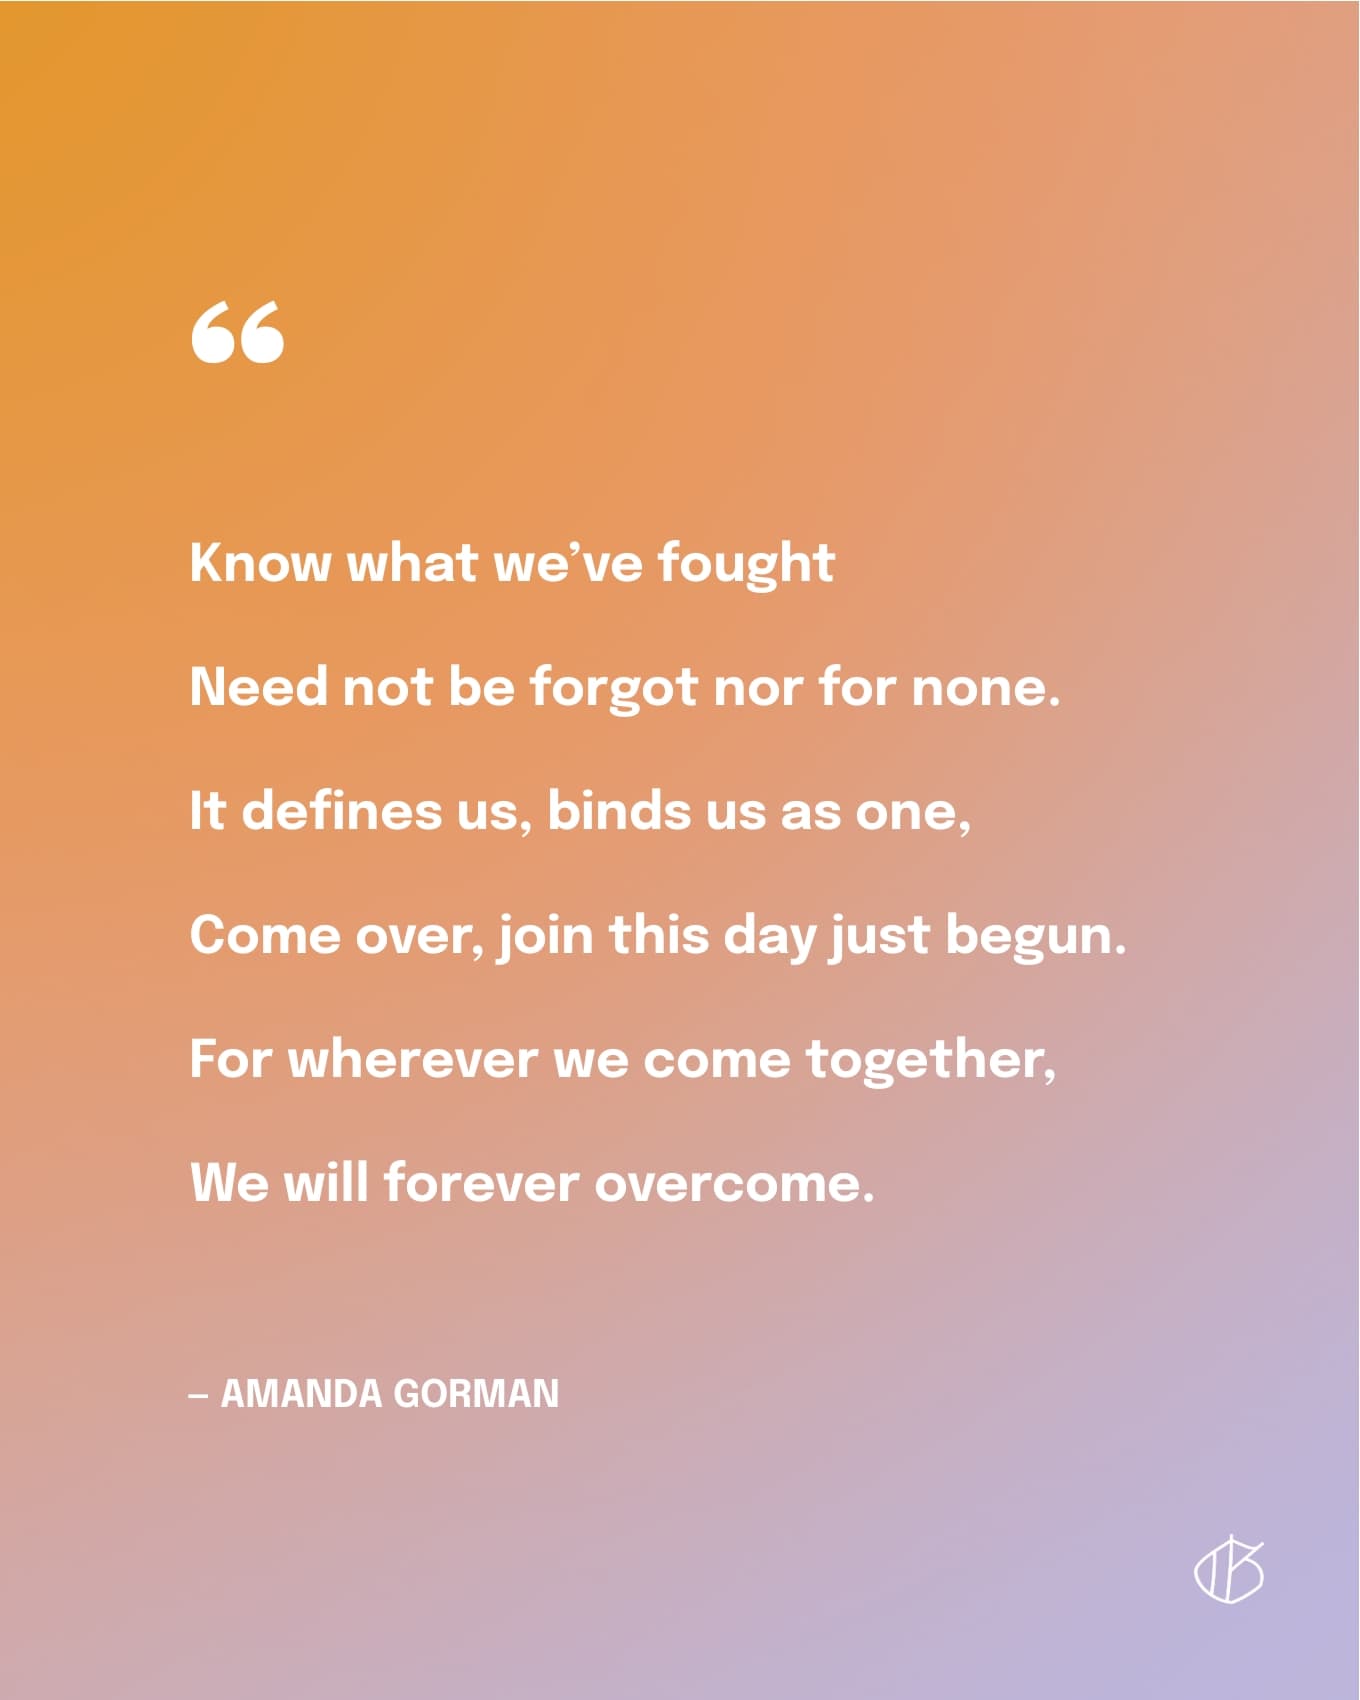 Know what we’ve fought   Need not be forgot nor for none.   It defines us, binds us as one,   Come over, join this day just begun.   For wherever we come together,   We will forever overcome.  — Amanda Gorman